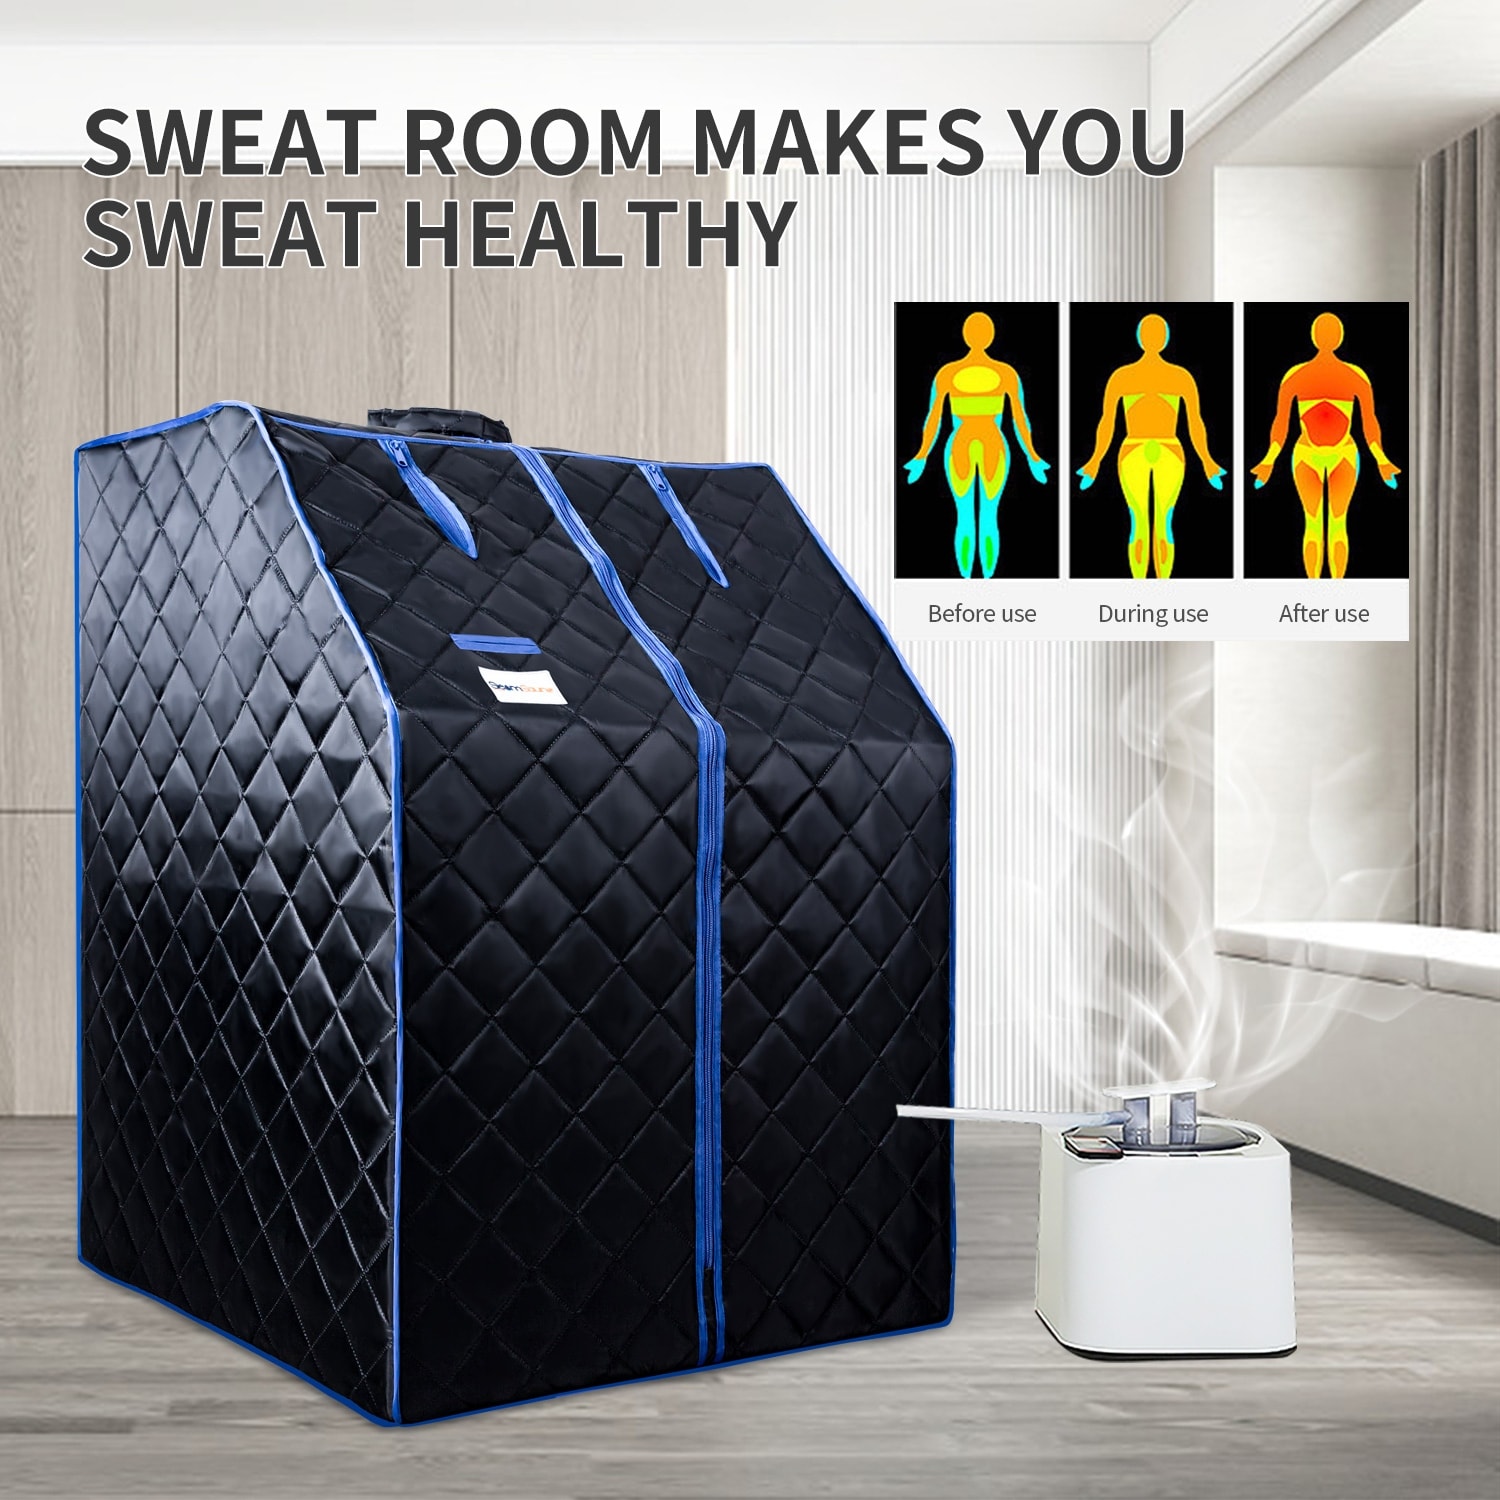 Portable Sauna Tent Steam Sauna Room with Heater, Tent, Chair&Remote Included for Home Sauna, Enjoy Your Own Personal Spa